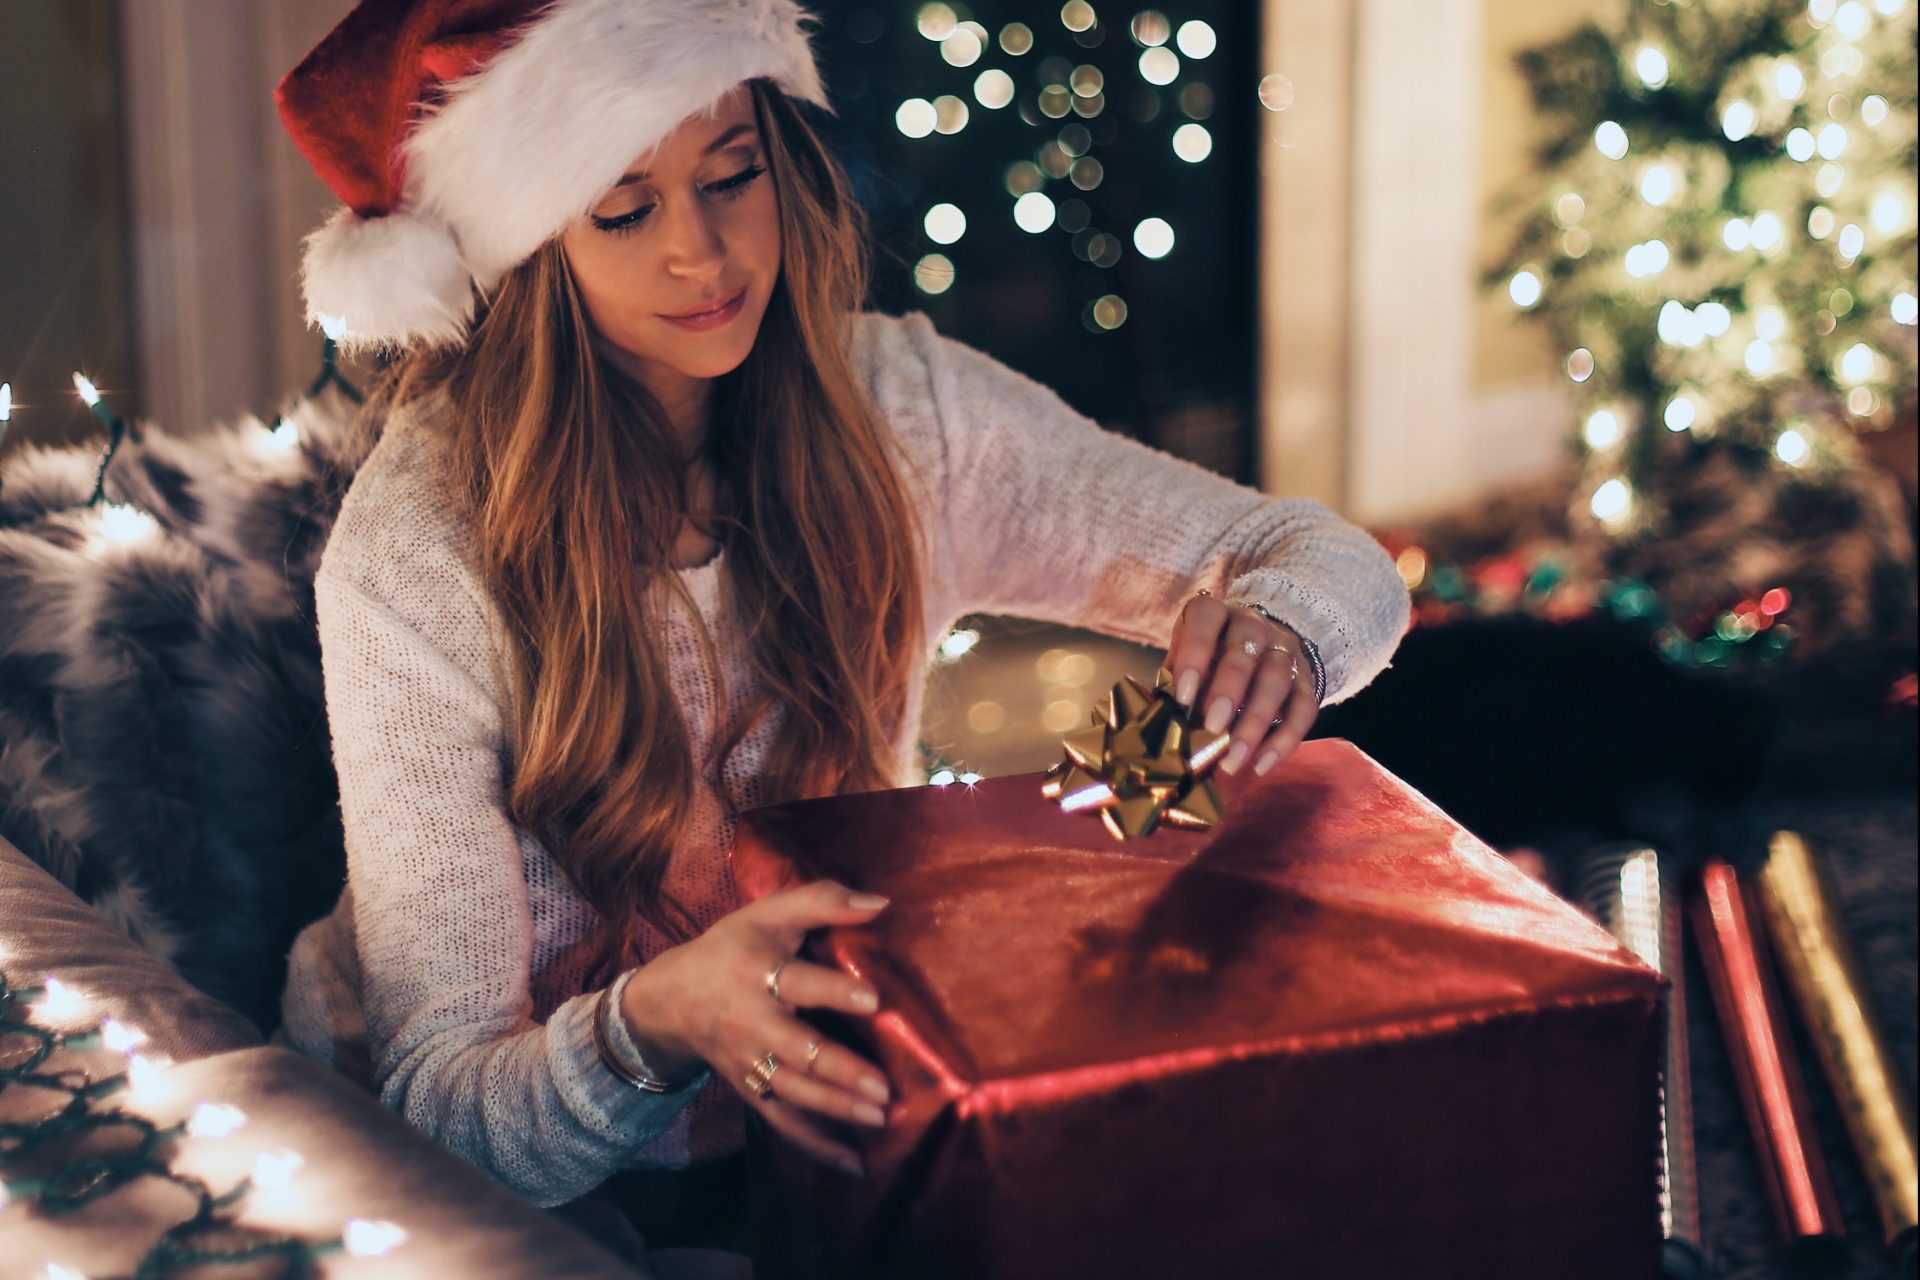 Here's How To Pick The Perfect Holiday Gift For Someone, Based On Their Love Language